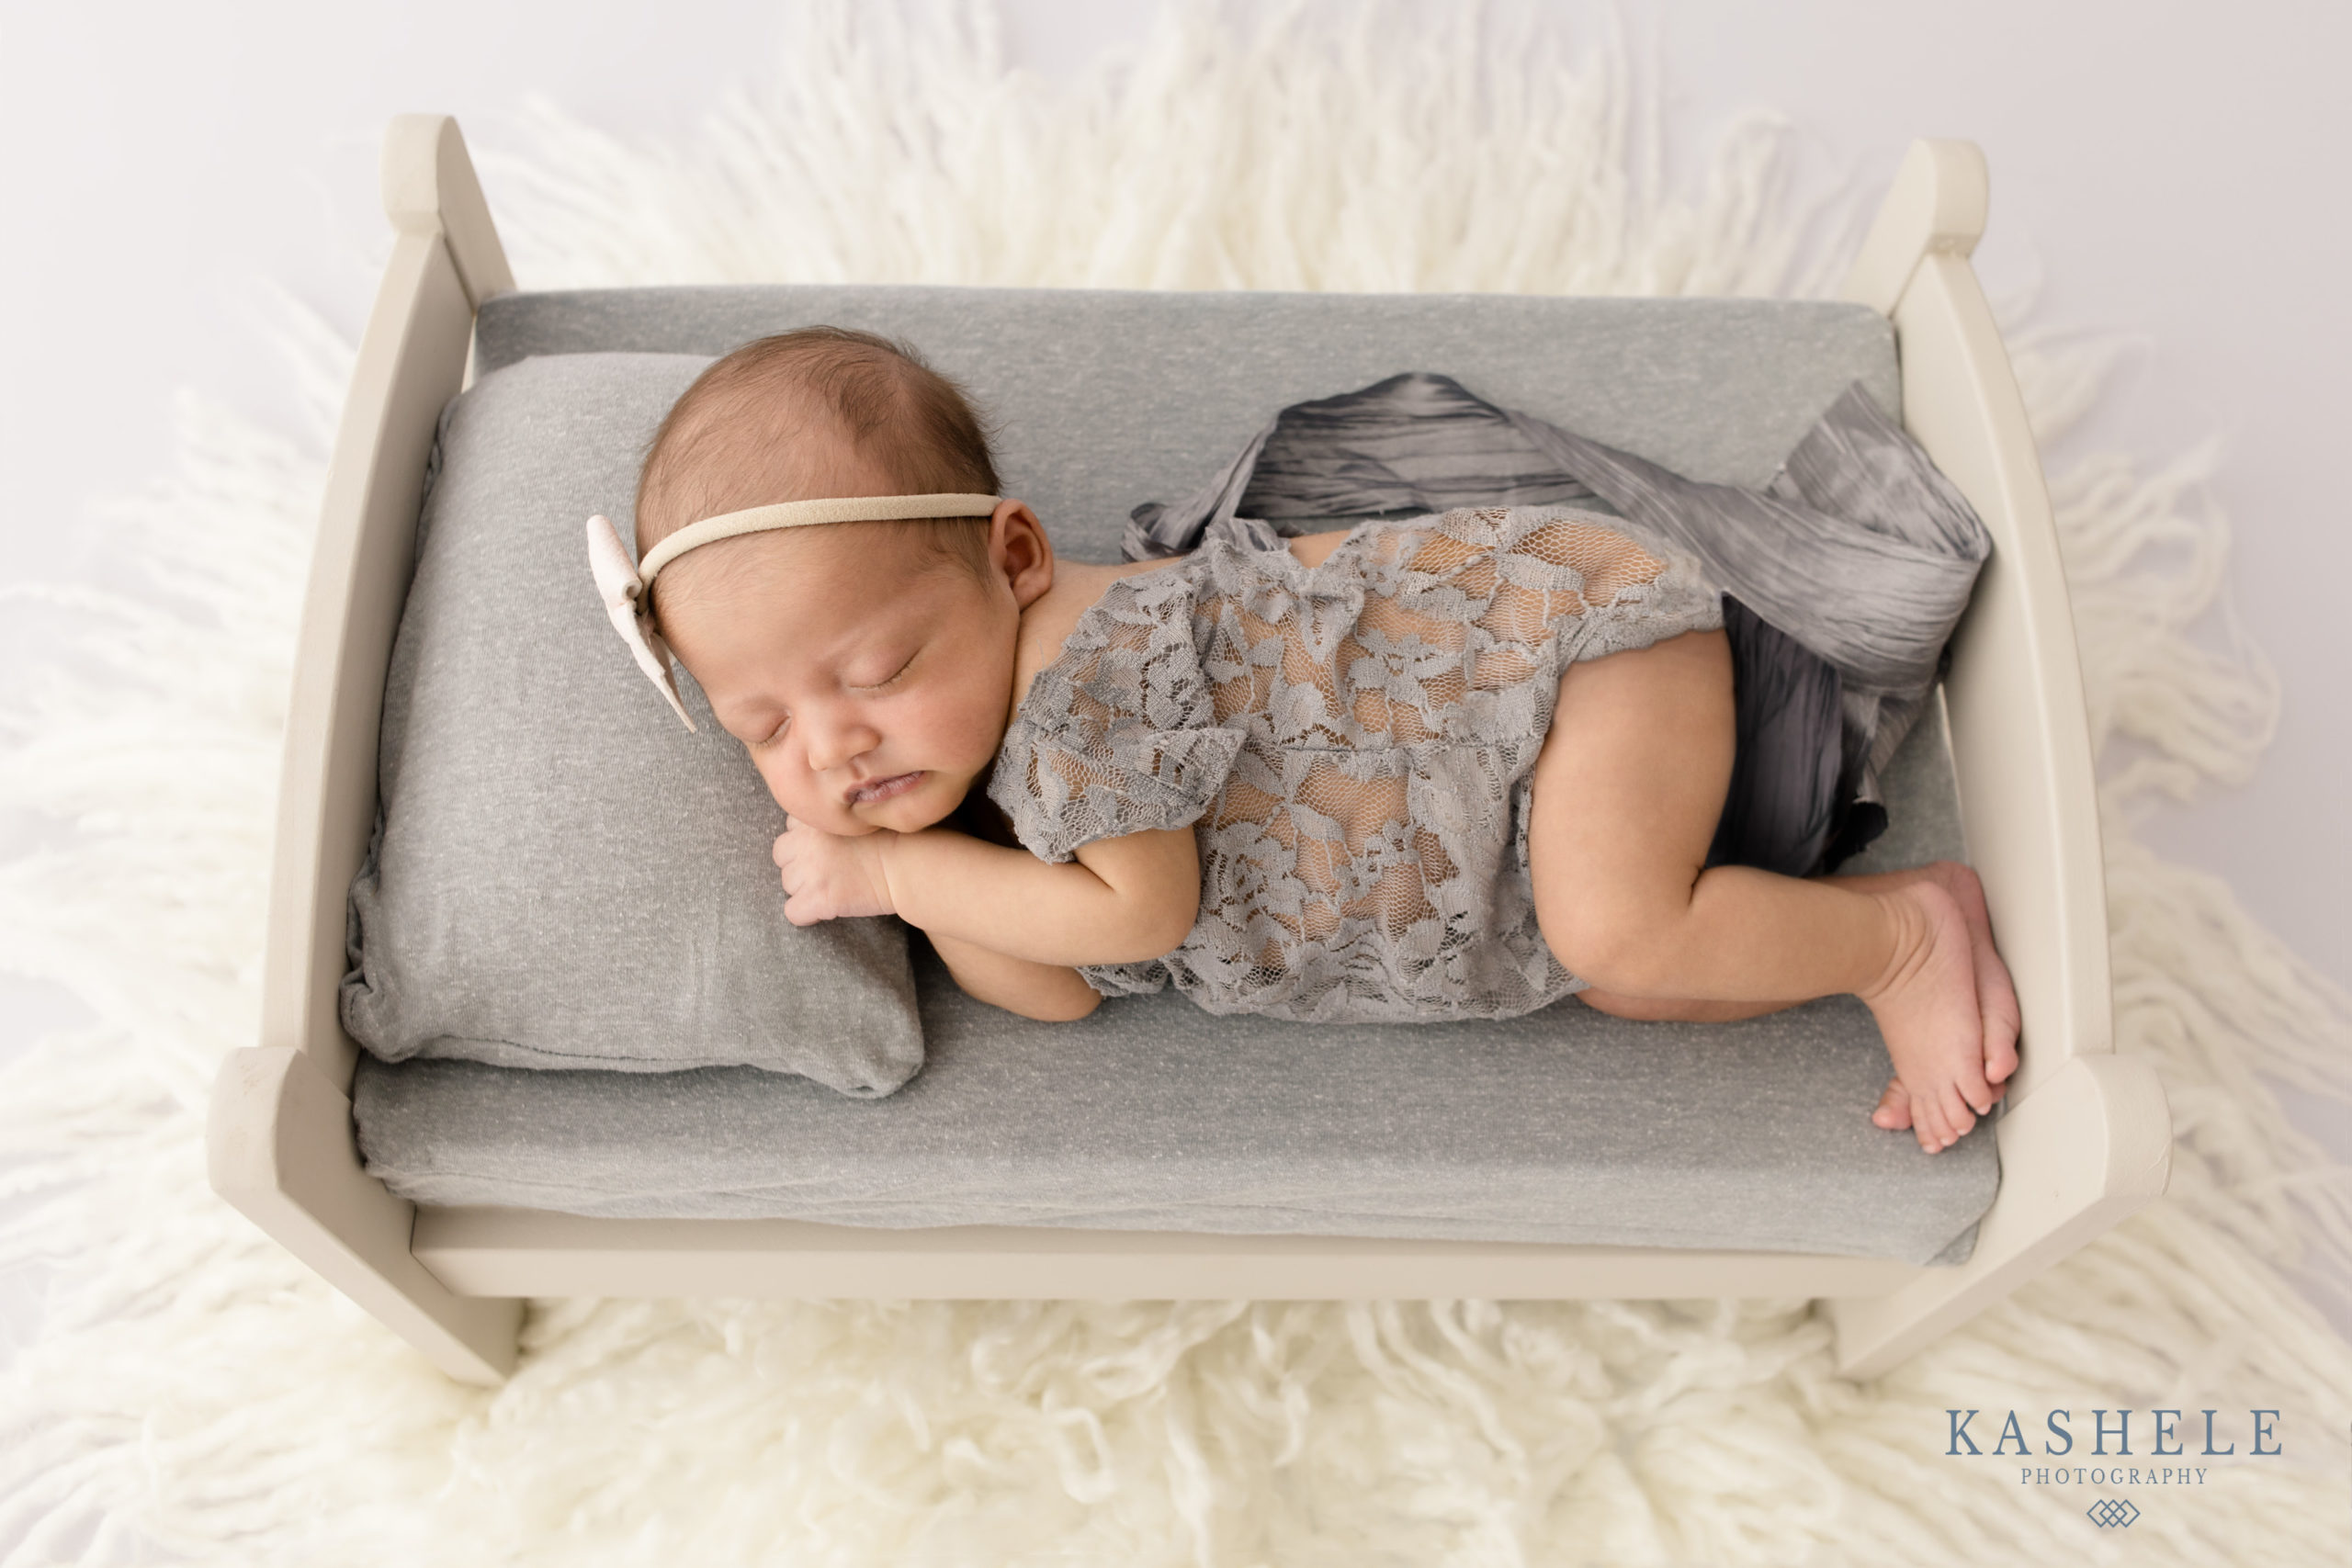 Newborn photo session from A to Z - Jane Atter Photography